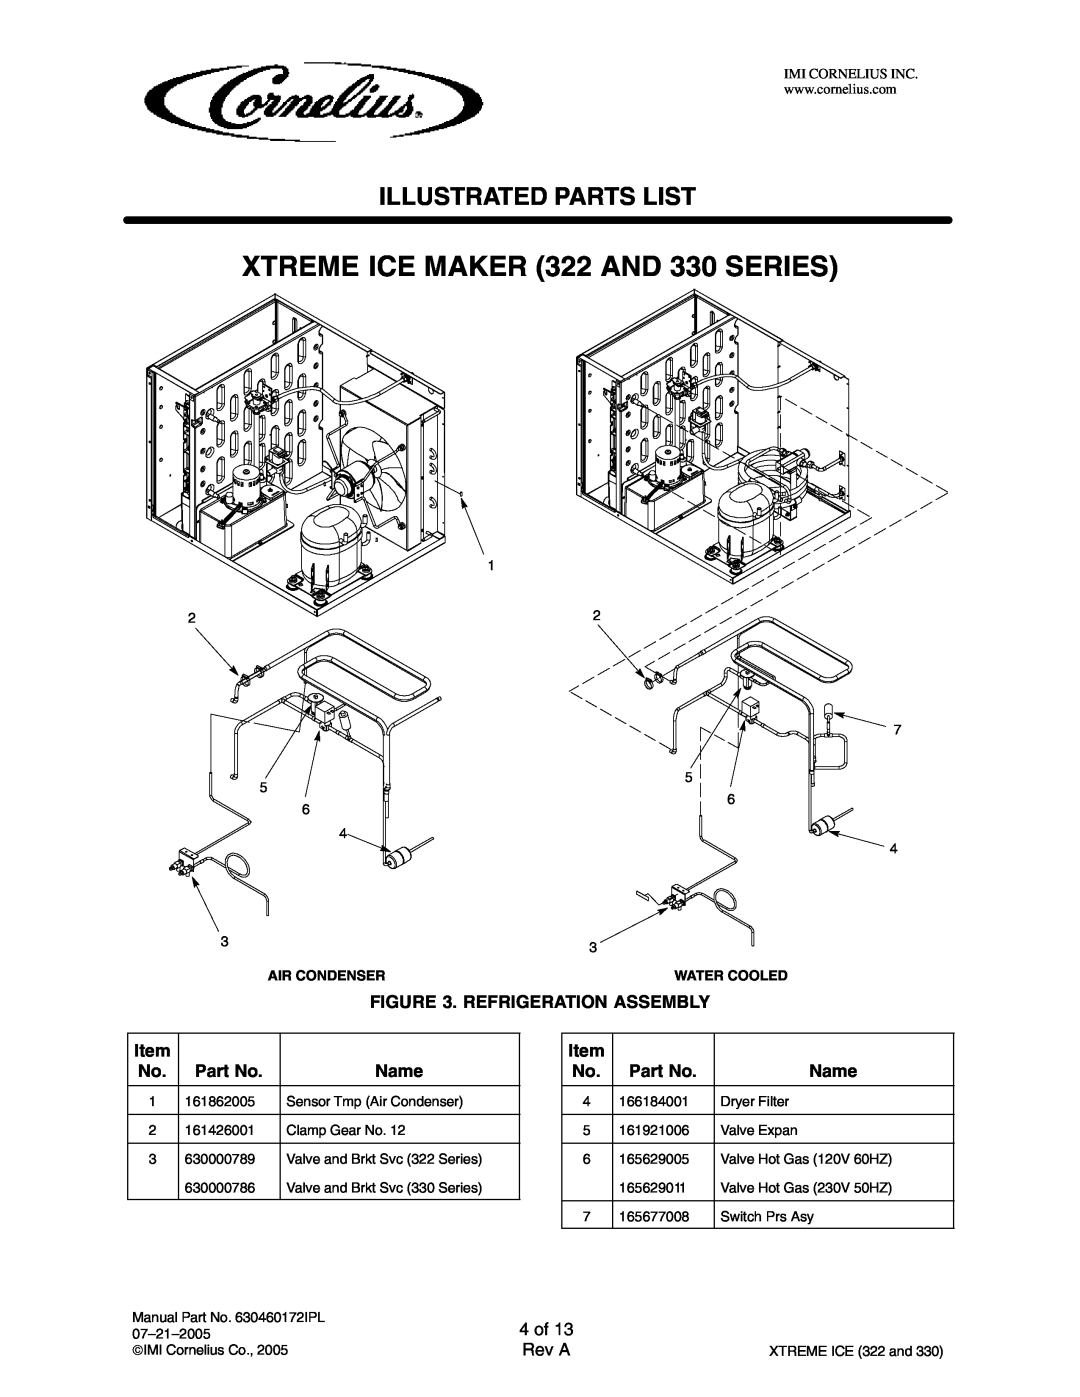 Cornelius 631803002 4 of, XTREME ICE MAKER 322 AND 330 SERIES, Illustrated Parts List, Rev A, Air Condenser, Water Cooled 